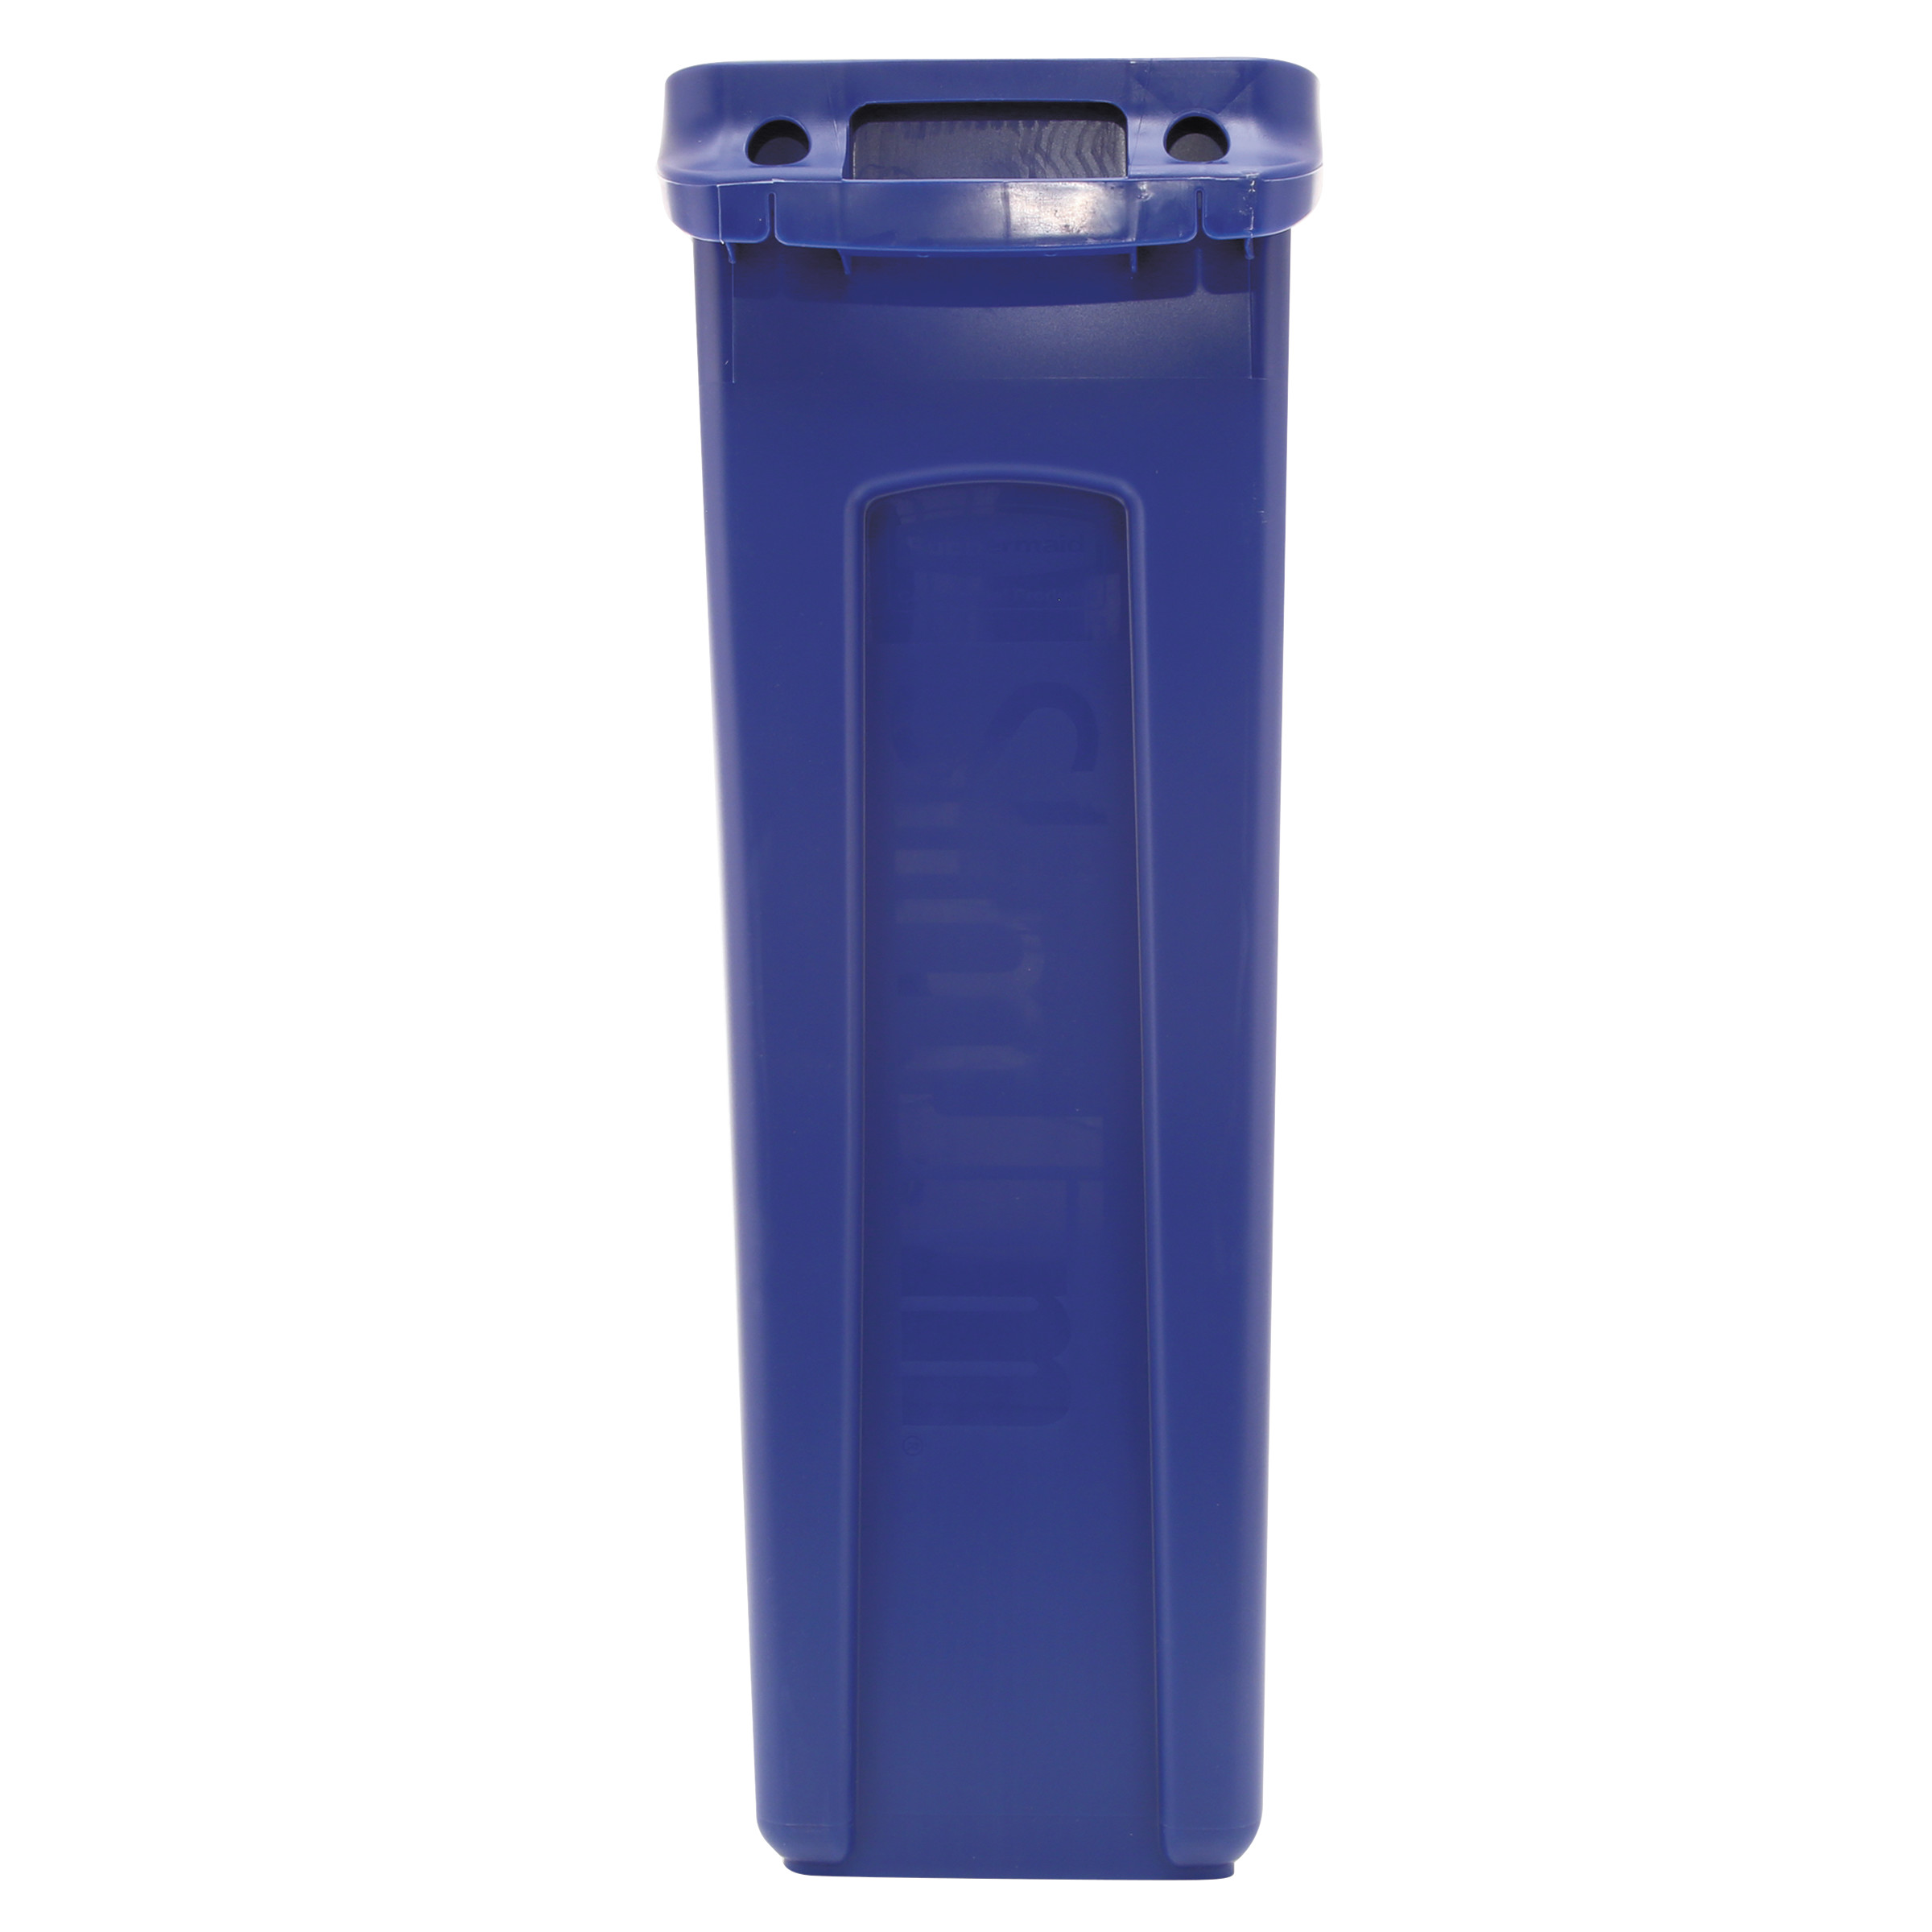 Rubbermaid Commercial Products FG354007BLUE Venting Slim Jim Recycling Waste Container, Blue - image 3 of 4